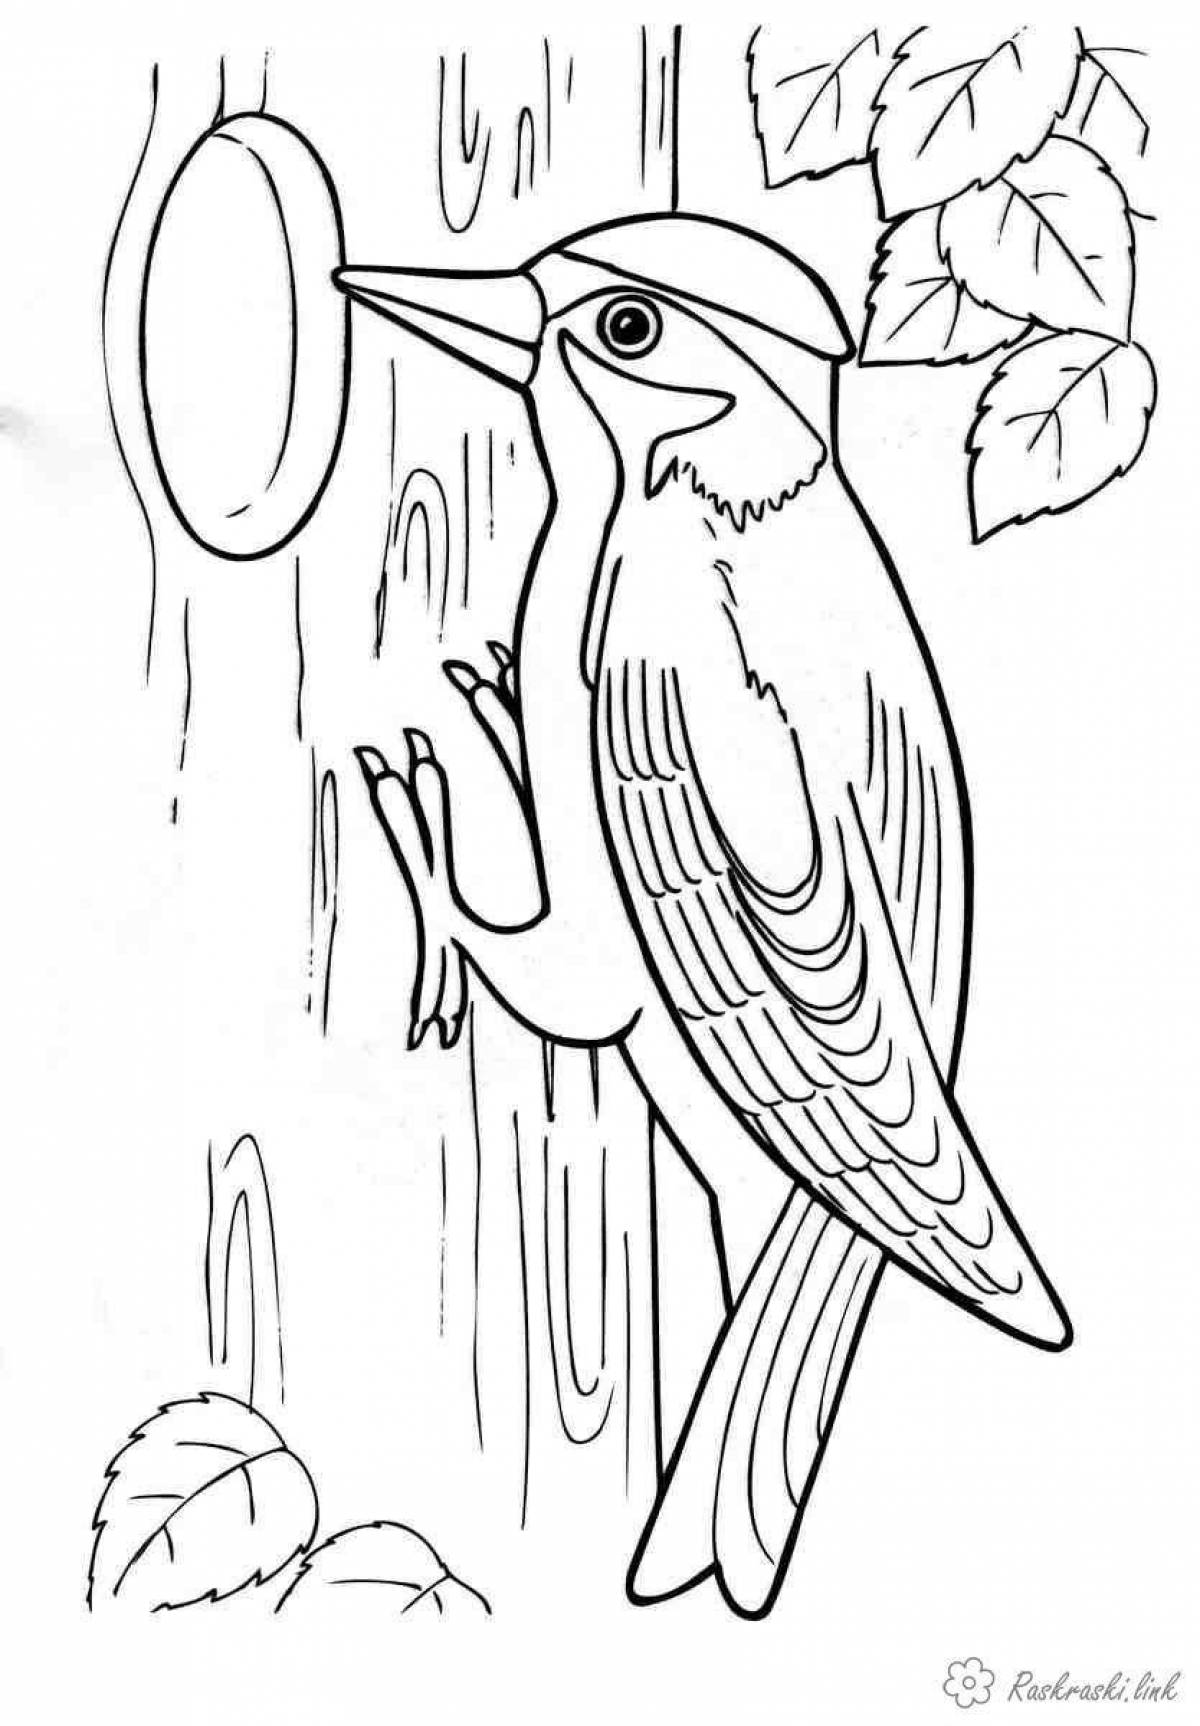 Intriguing woodpecker coloring book for kids